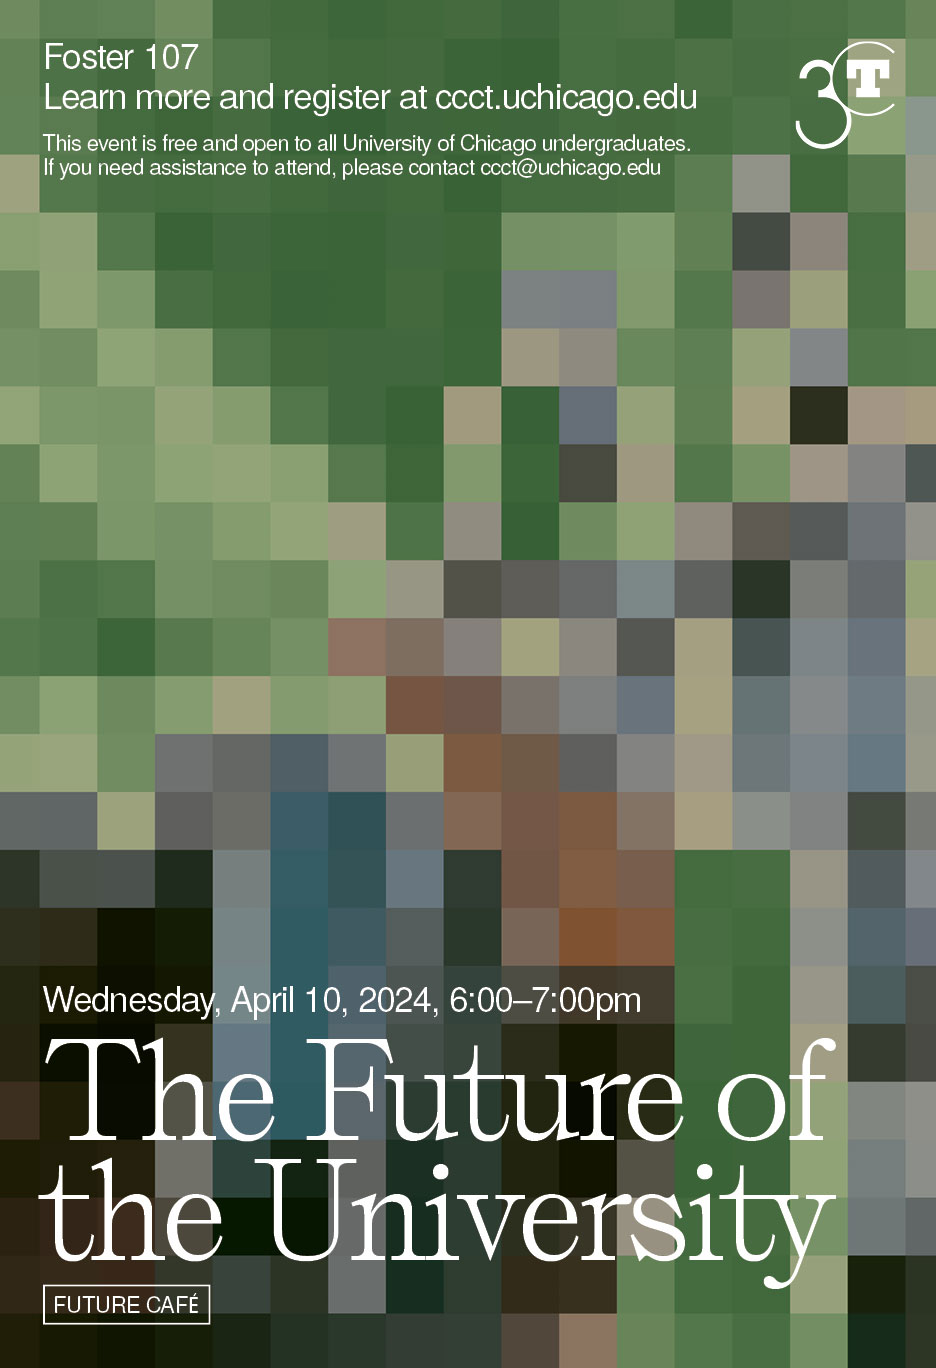 Highly pixelated image with green, brown, blue, gray, and black. Poster for The Future of the University.